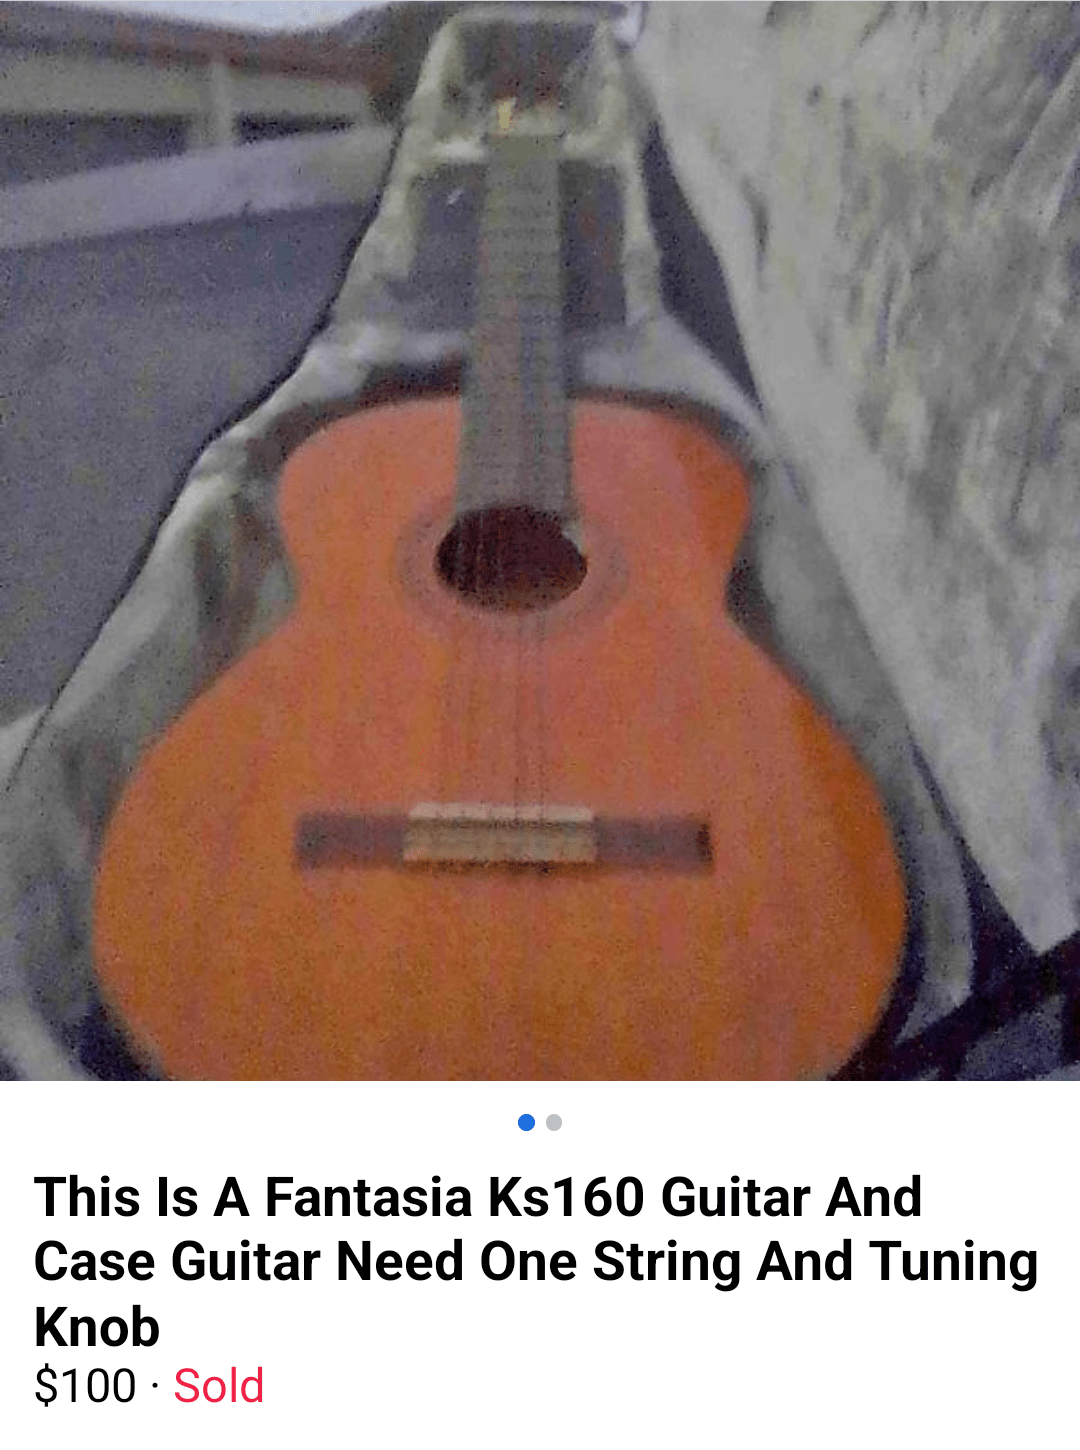 facebook market place listing titled this is a fantasia ks160 guitar and case guitar need one string tuning knob